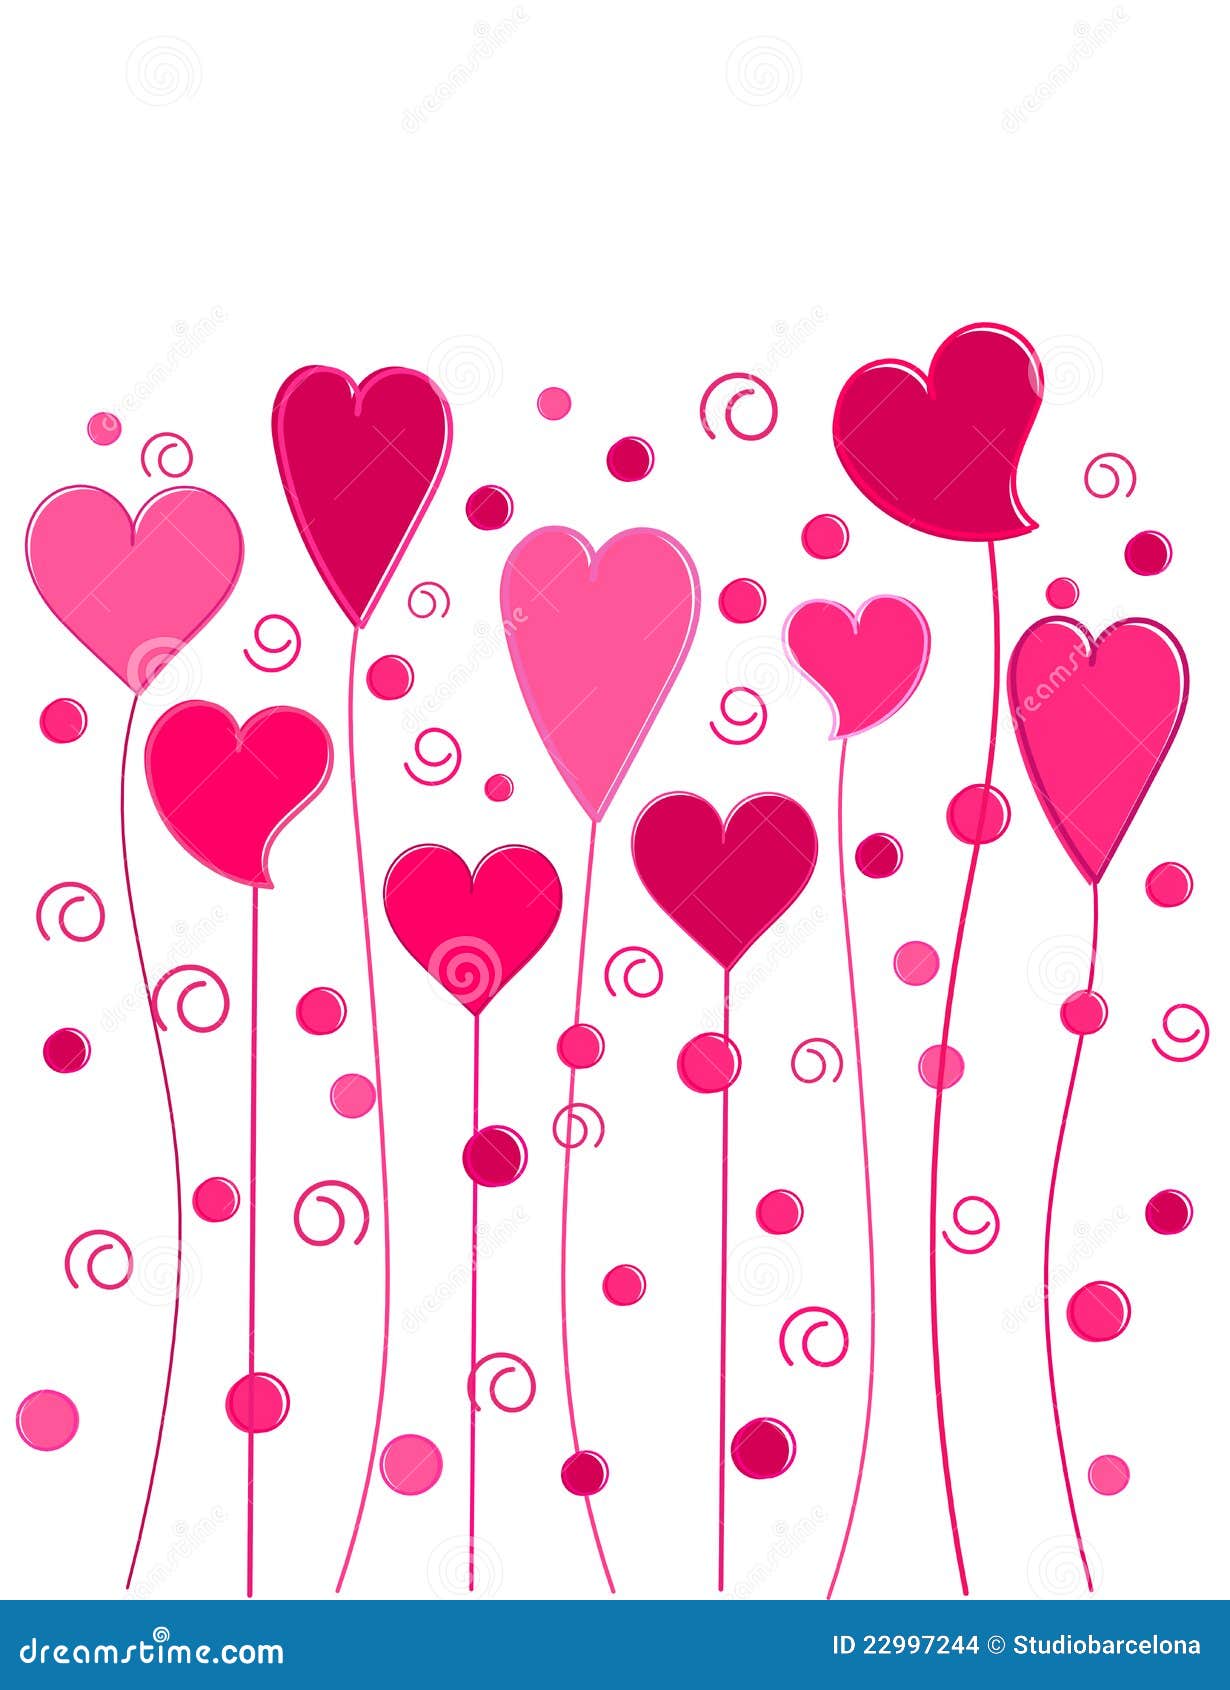 Lovely hearts stock vector. Illustration of background - 22997244